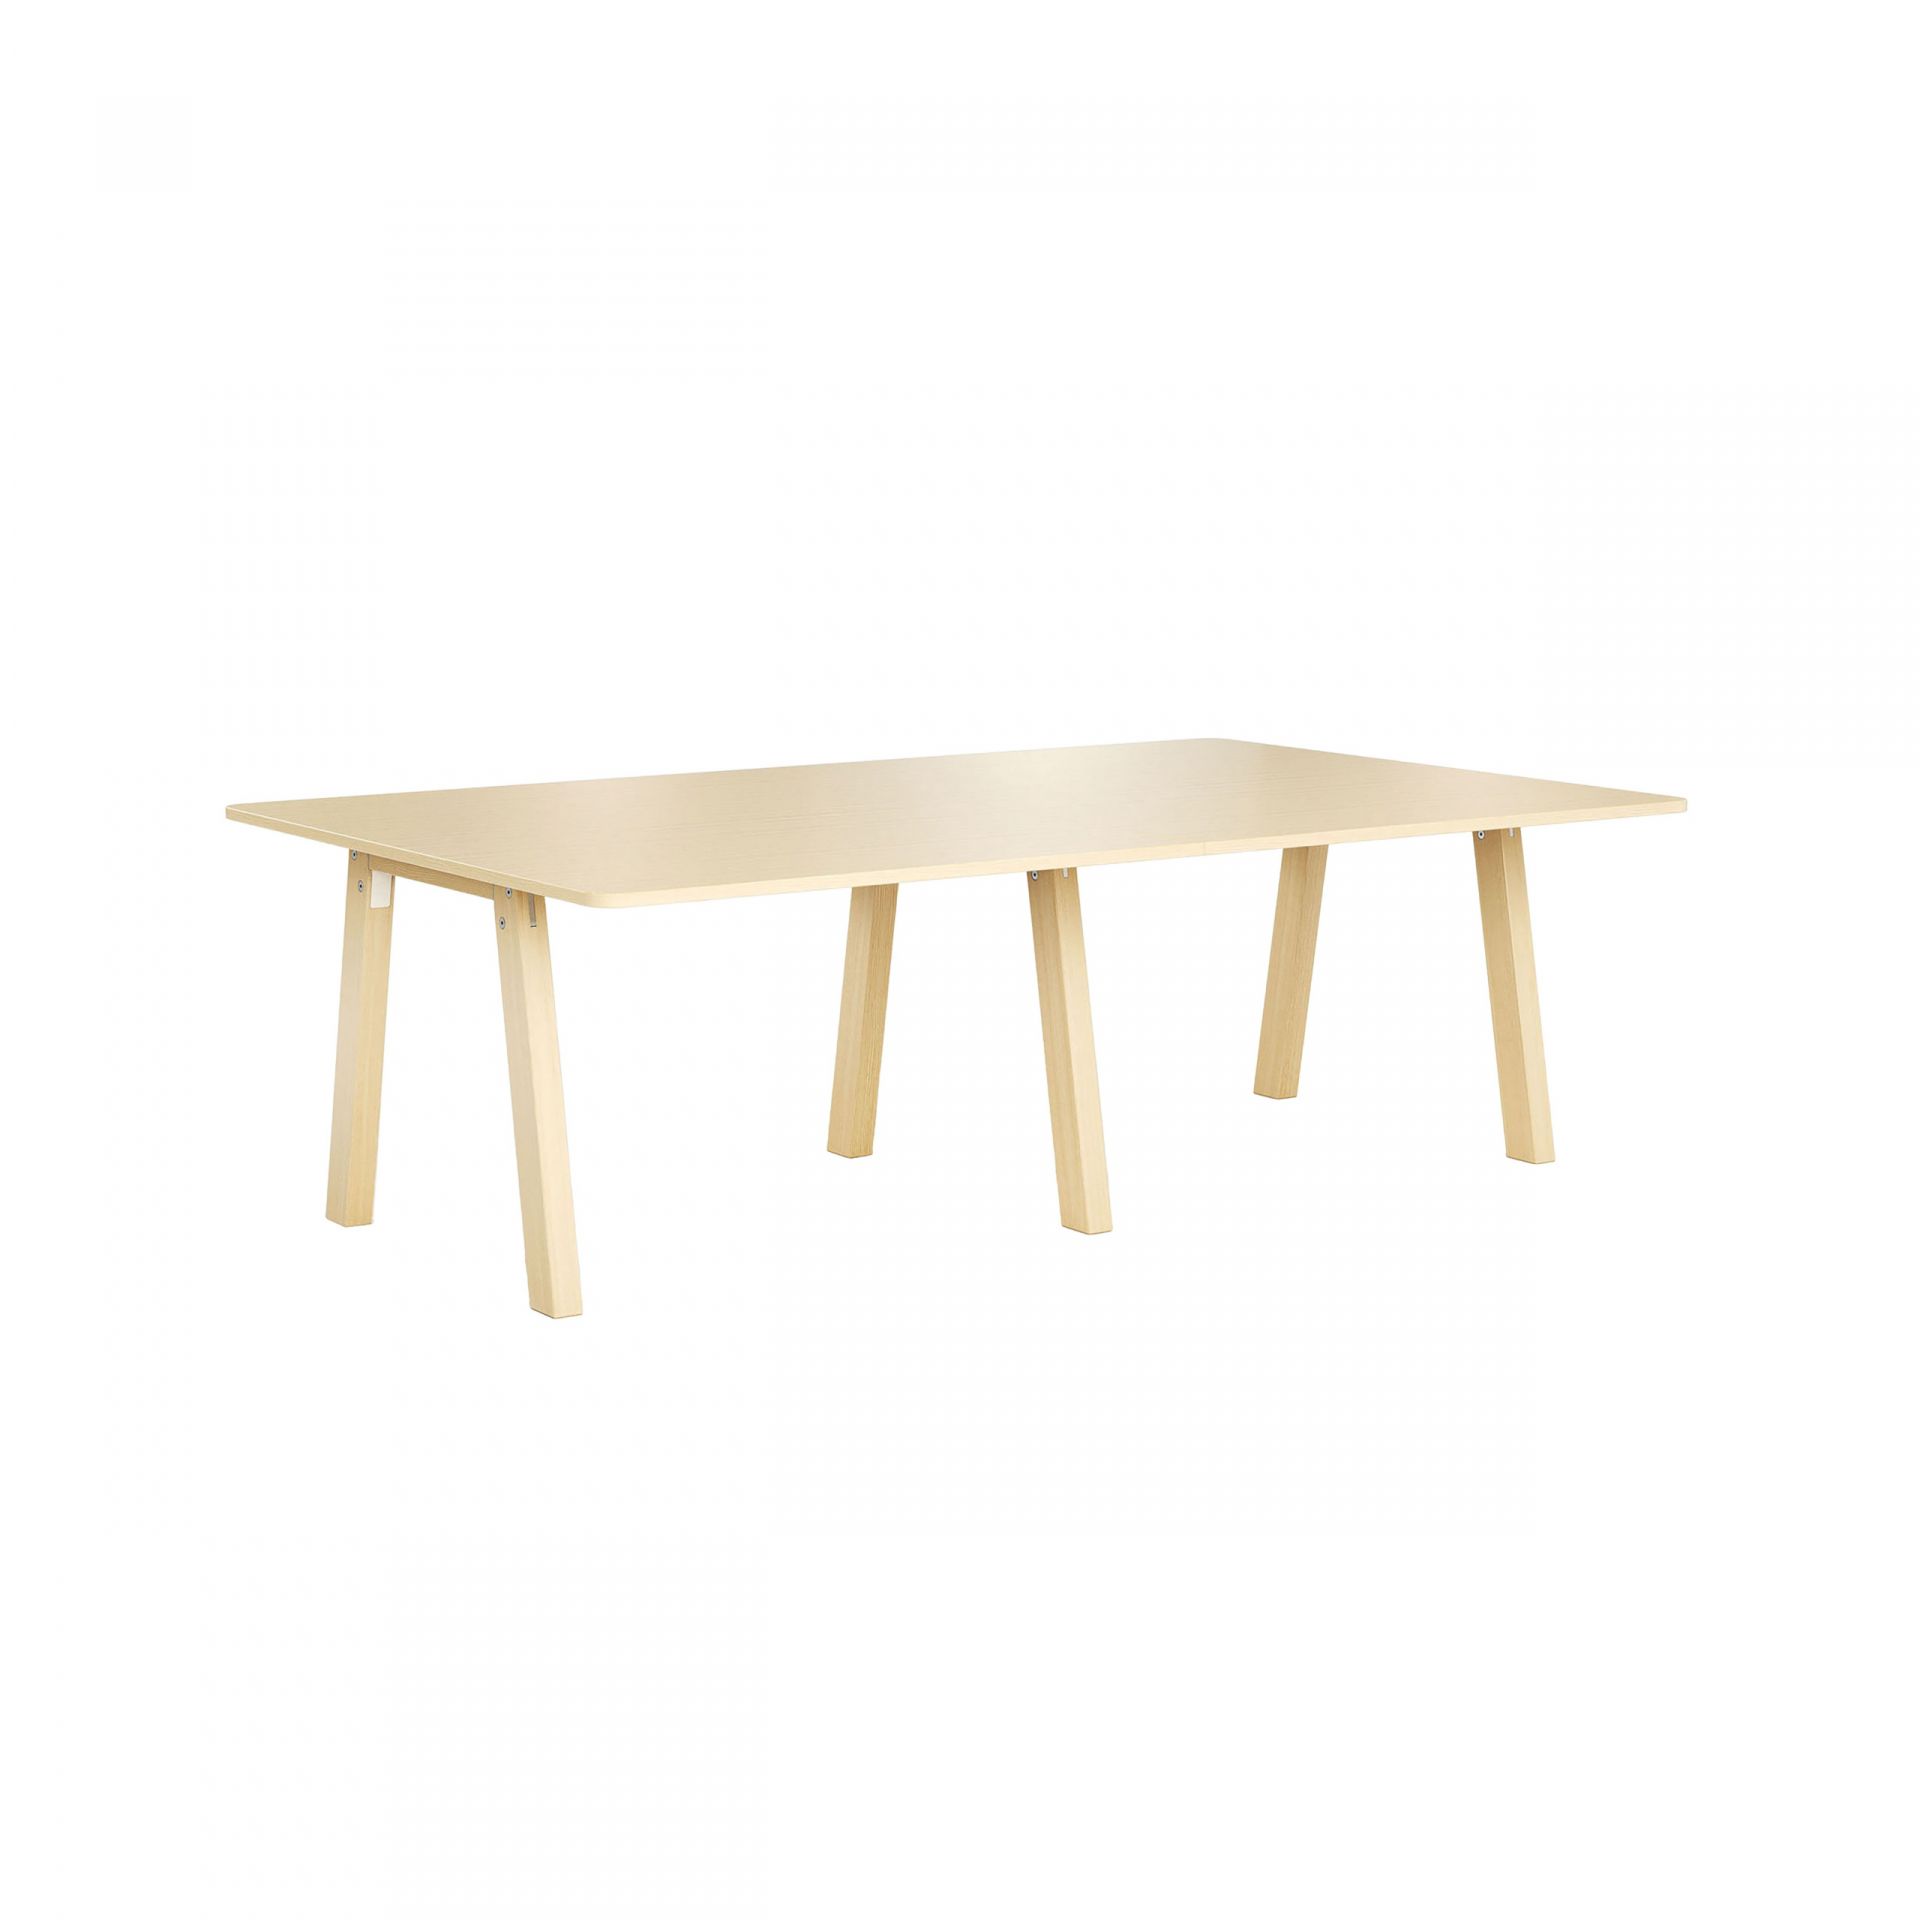 Collaborate Table with wooden legs product image 2